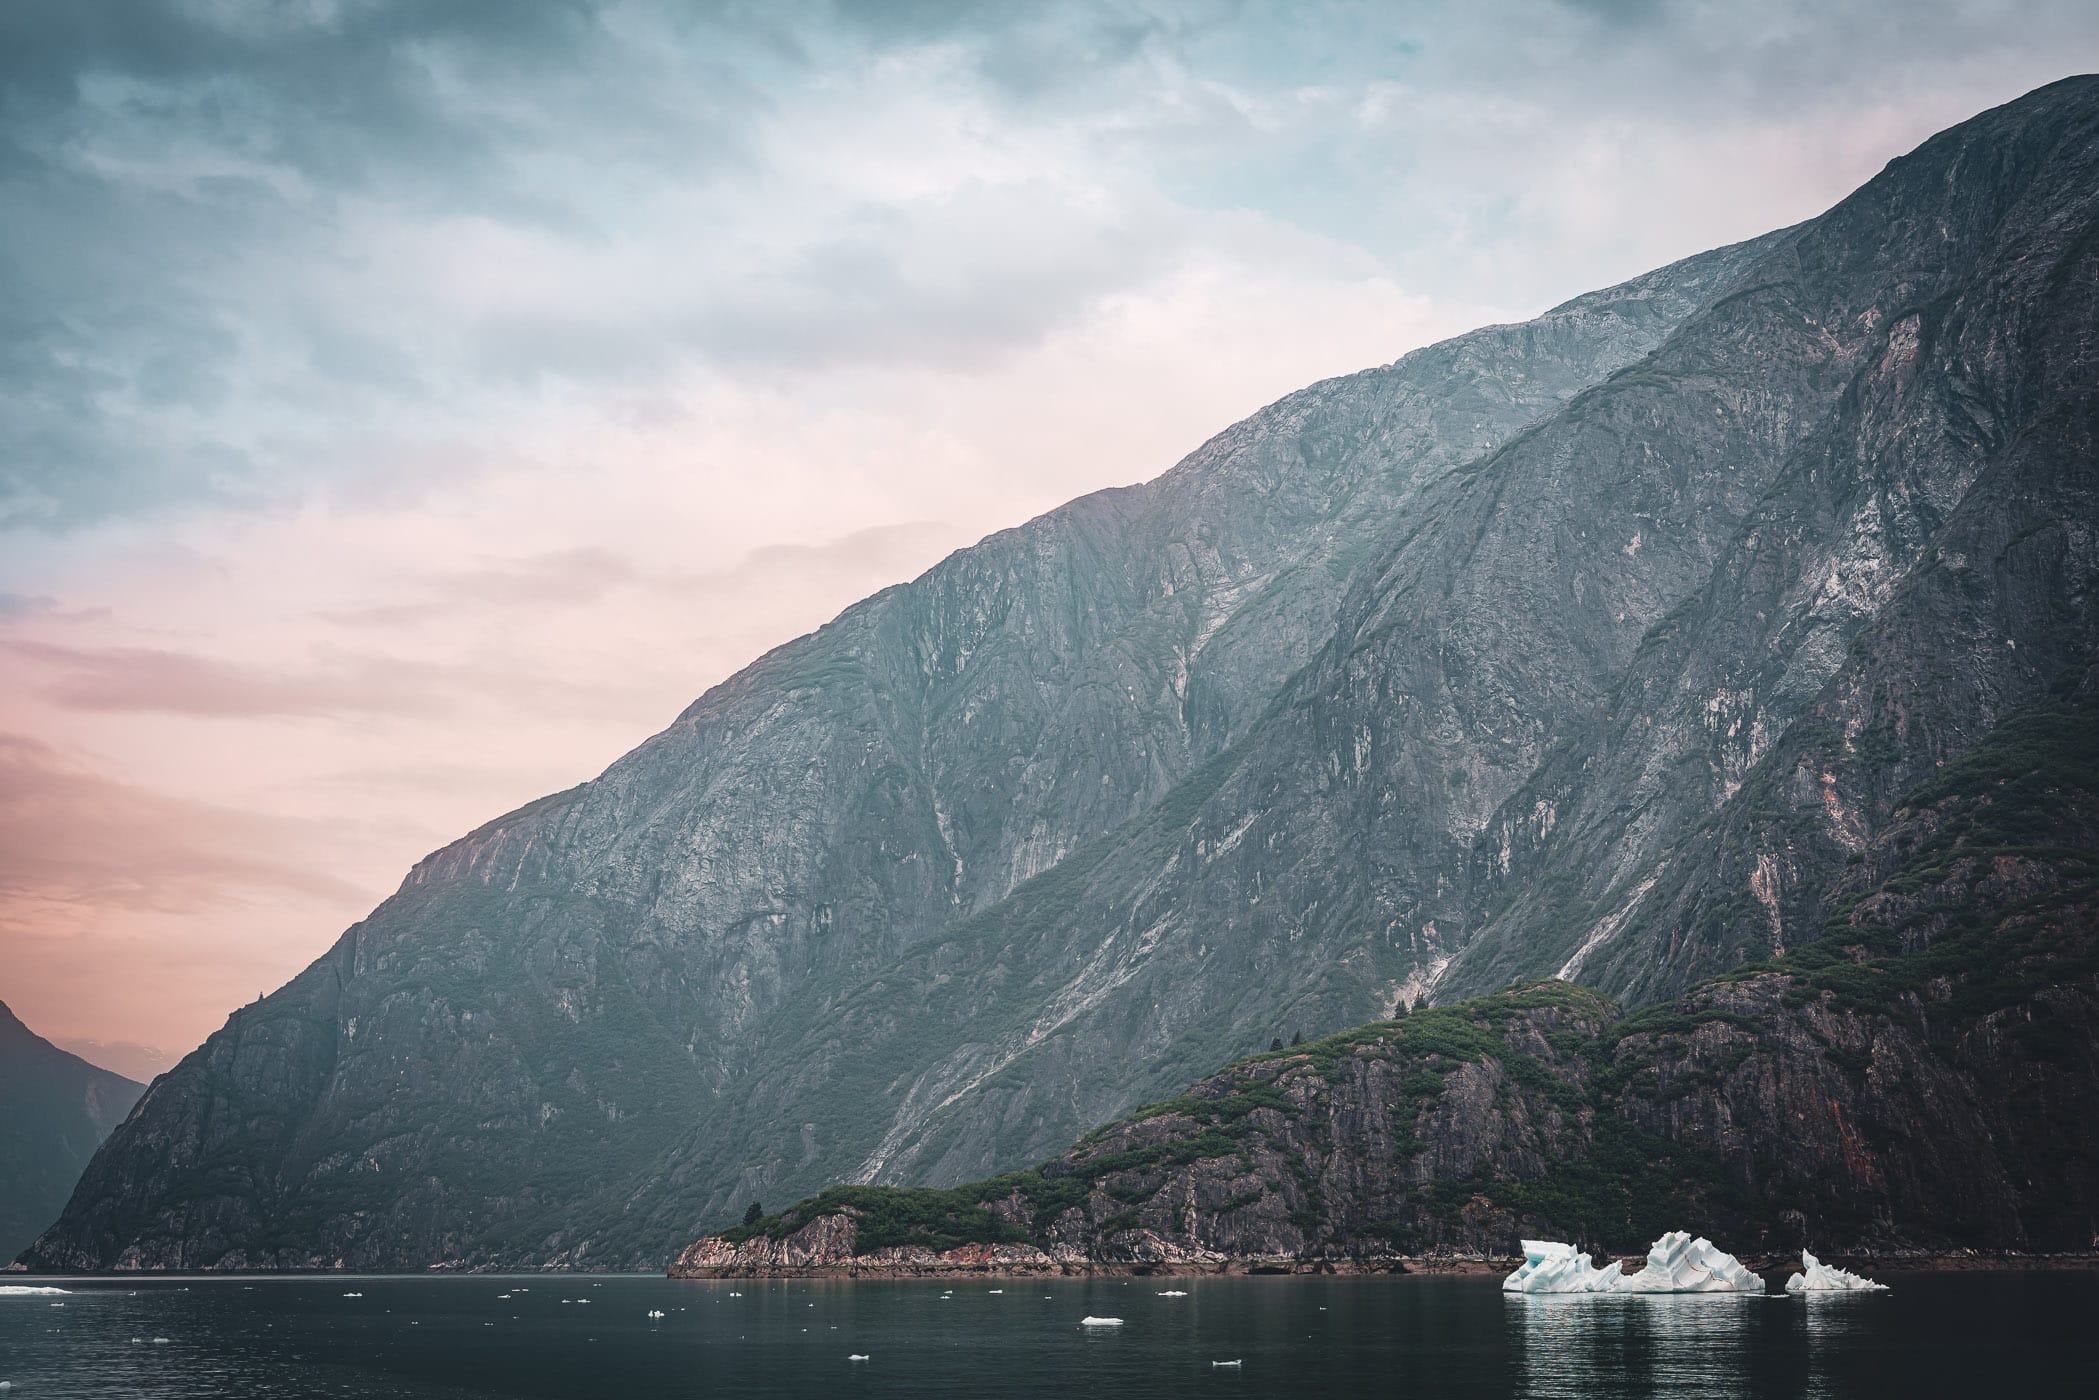 The first light of morning on Alaska's Tracy Arm Fjord.